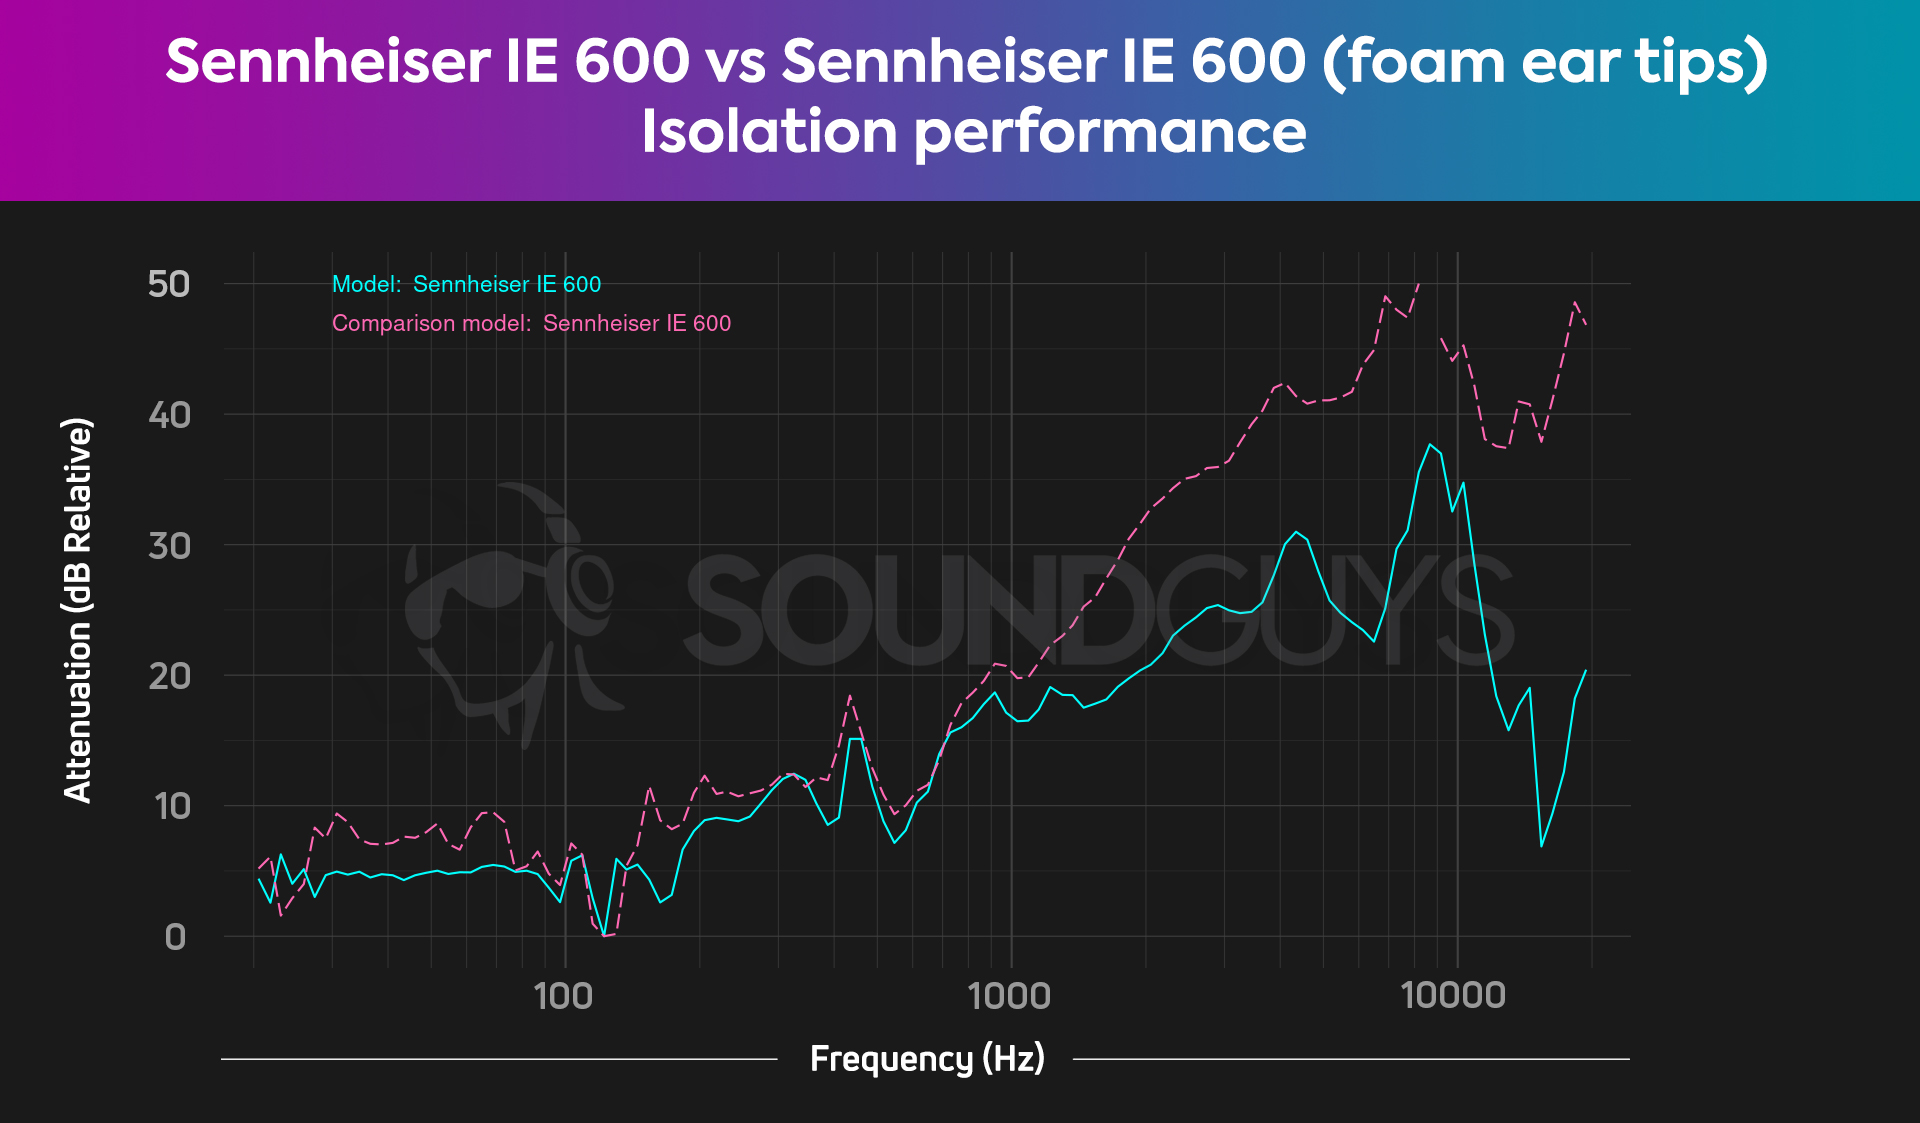 A chart tracks the isolation performance of the Sennheiser IE 600 with standard and also foam ear tips to show the differences.